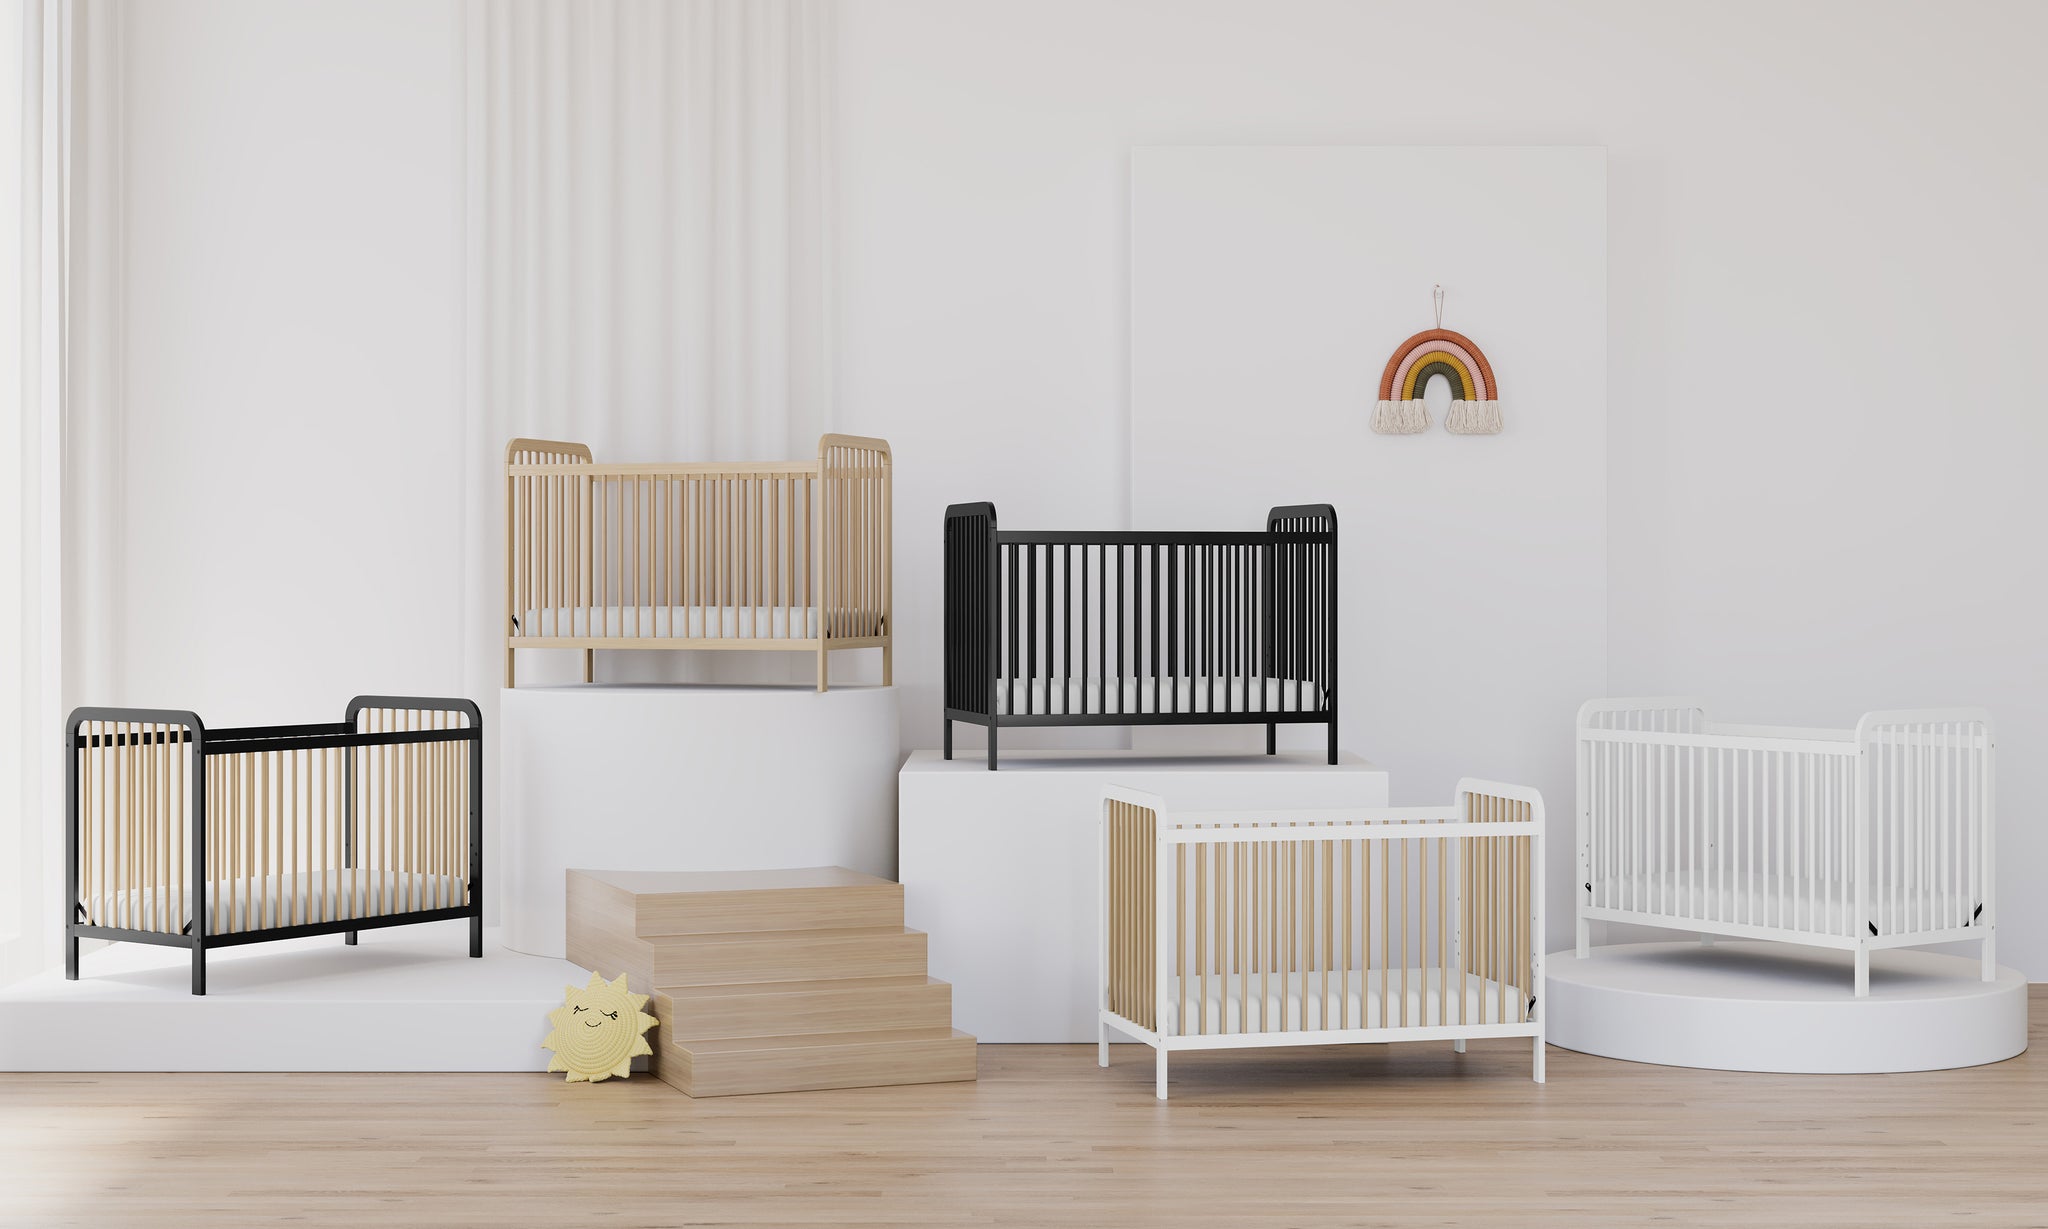 5 cribs showcased in the same space